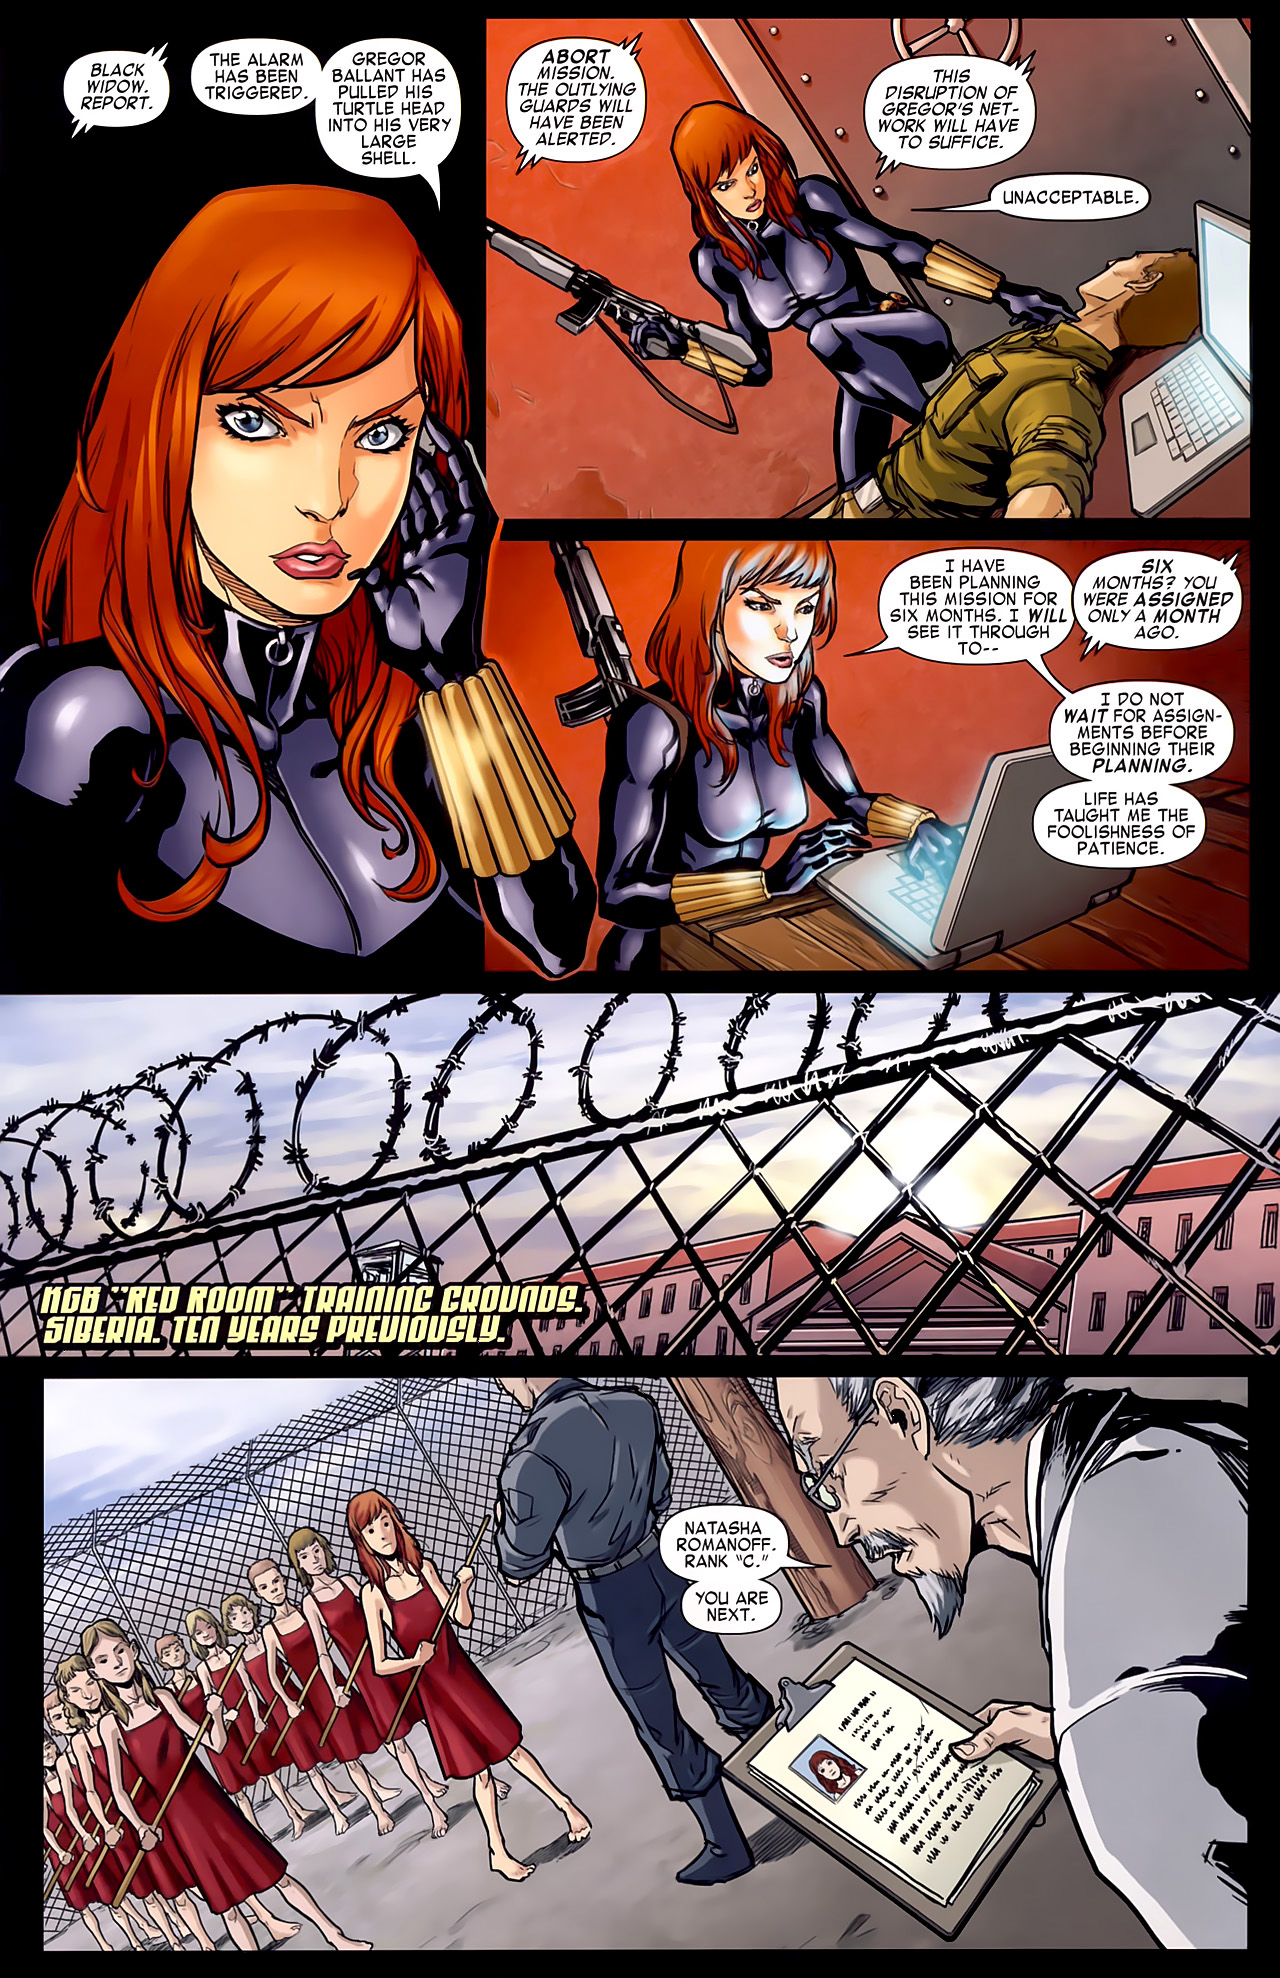 Read online Black Widow & The Marvel Girls comic -  Issue #1 - 10